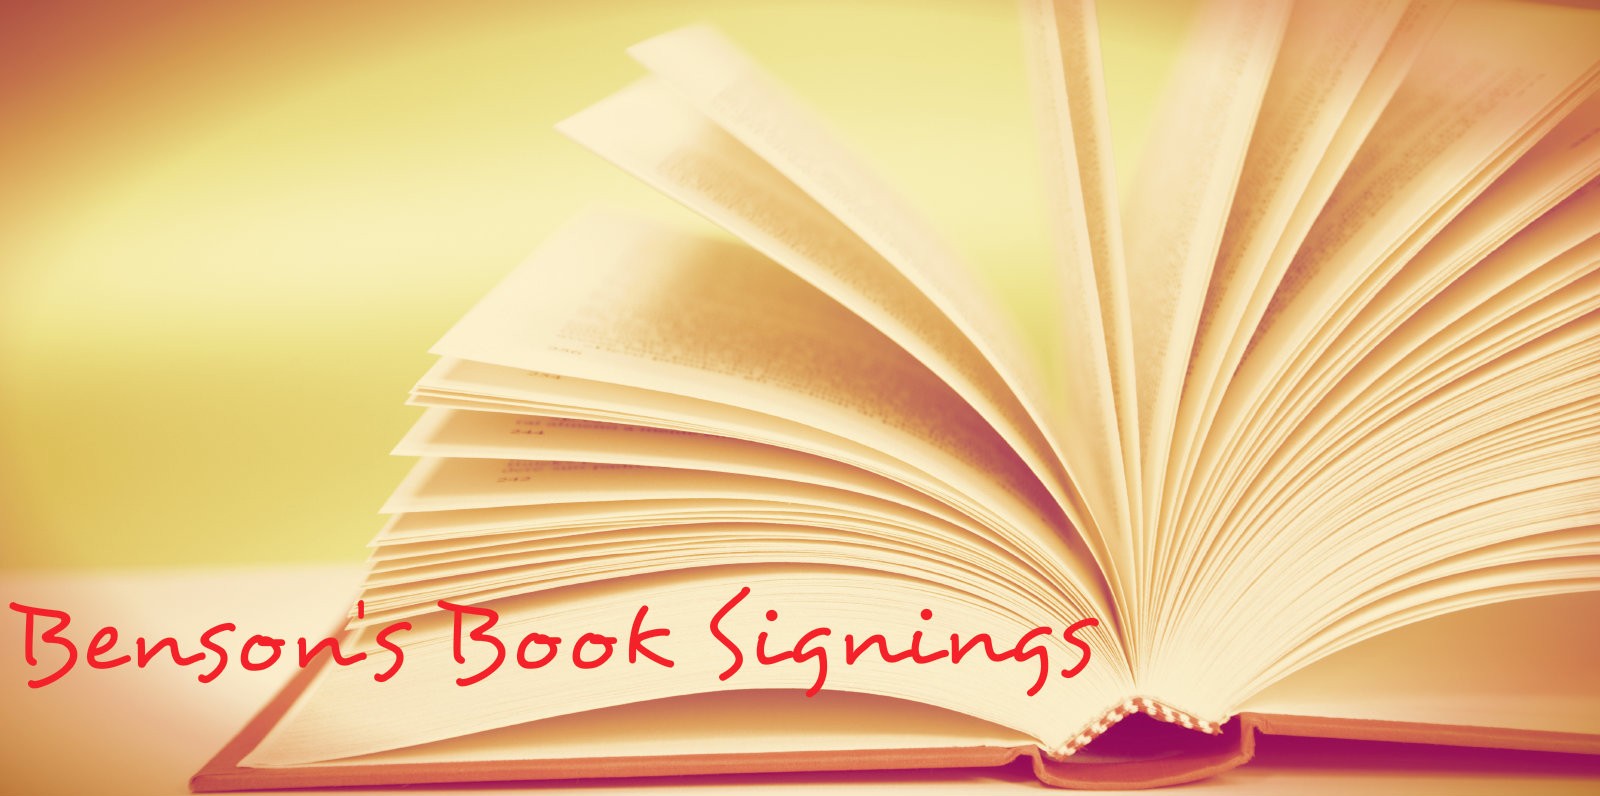 Book Signings, Lectures and More